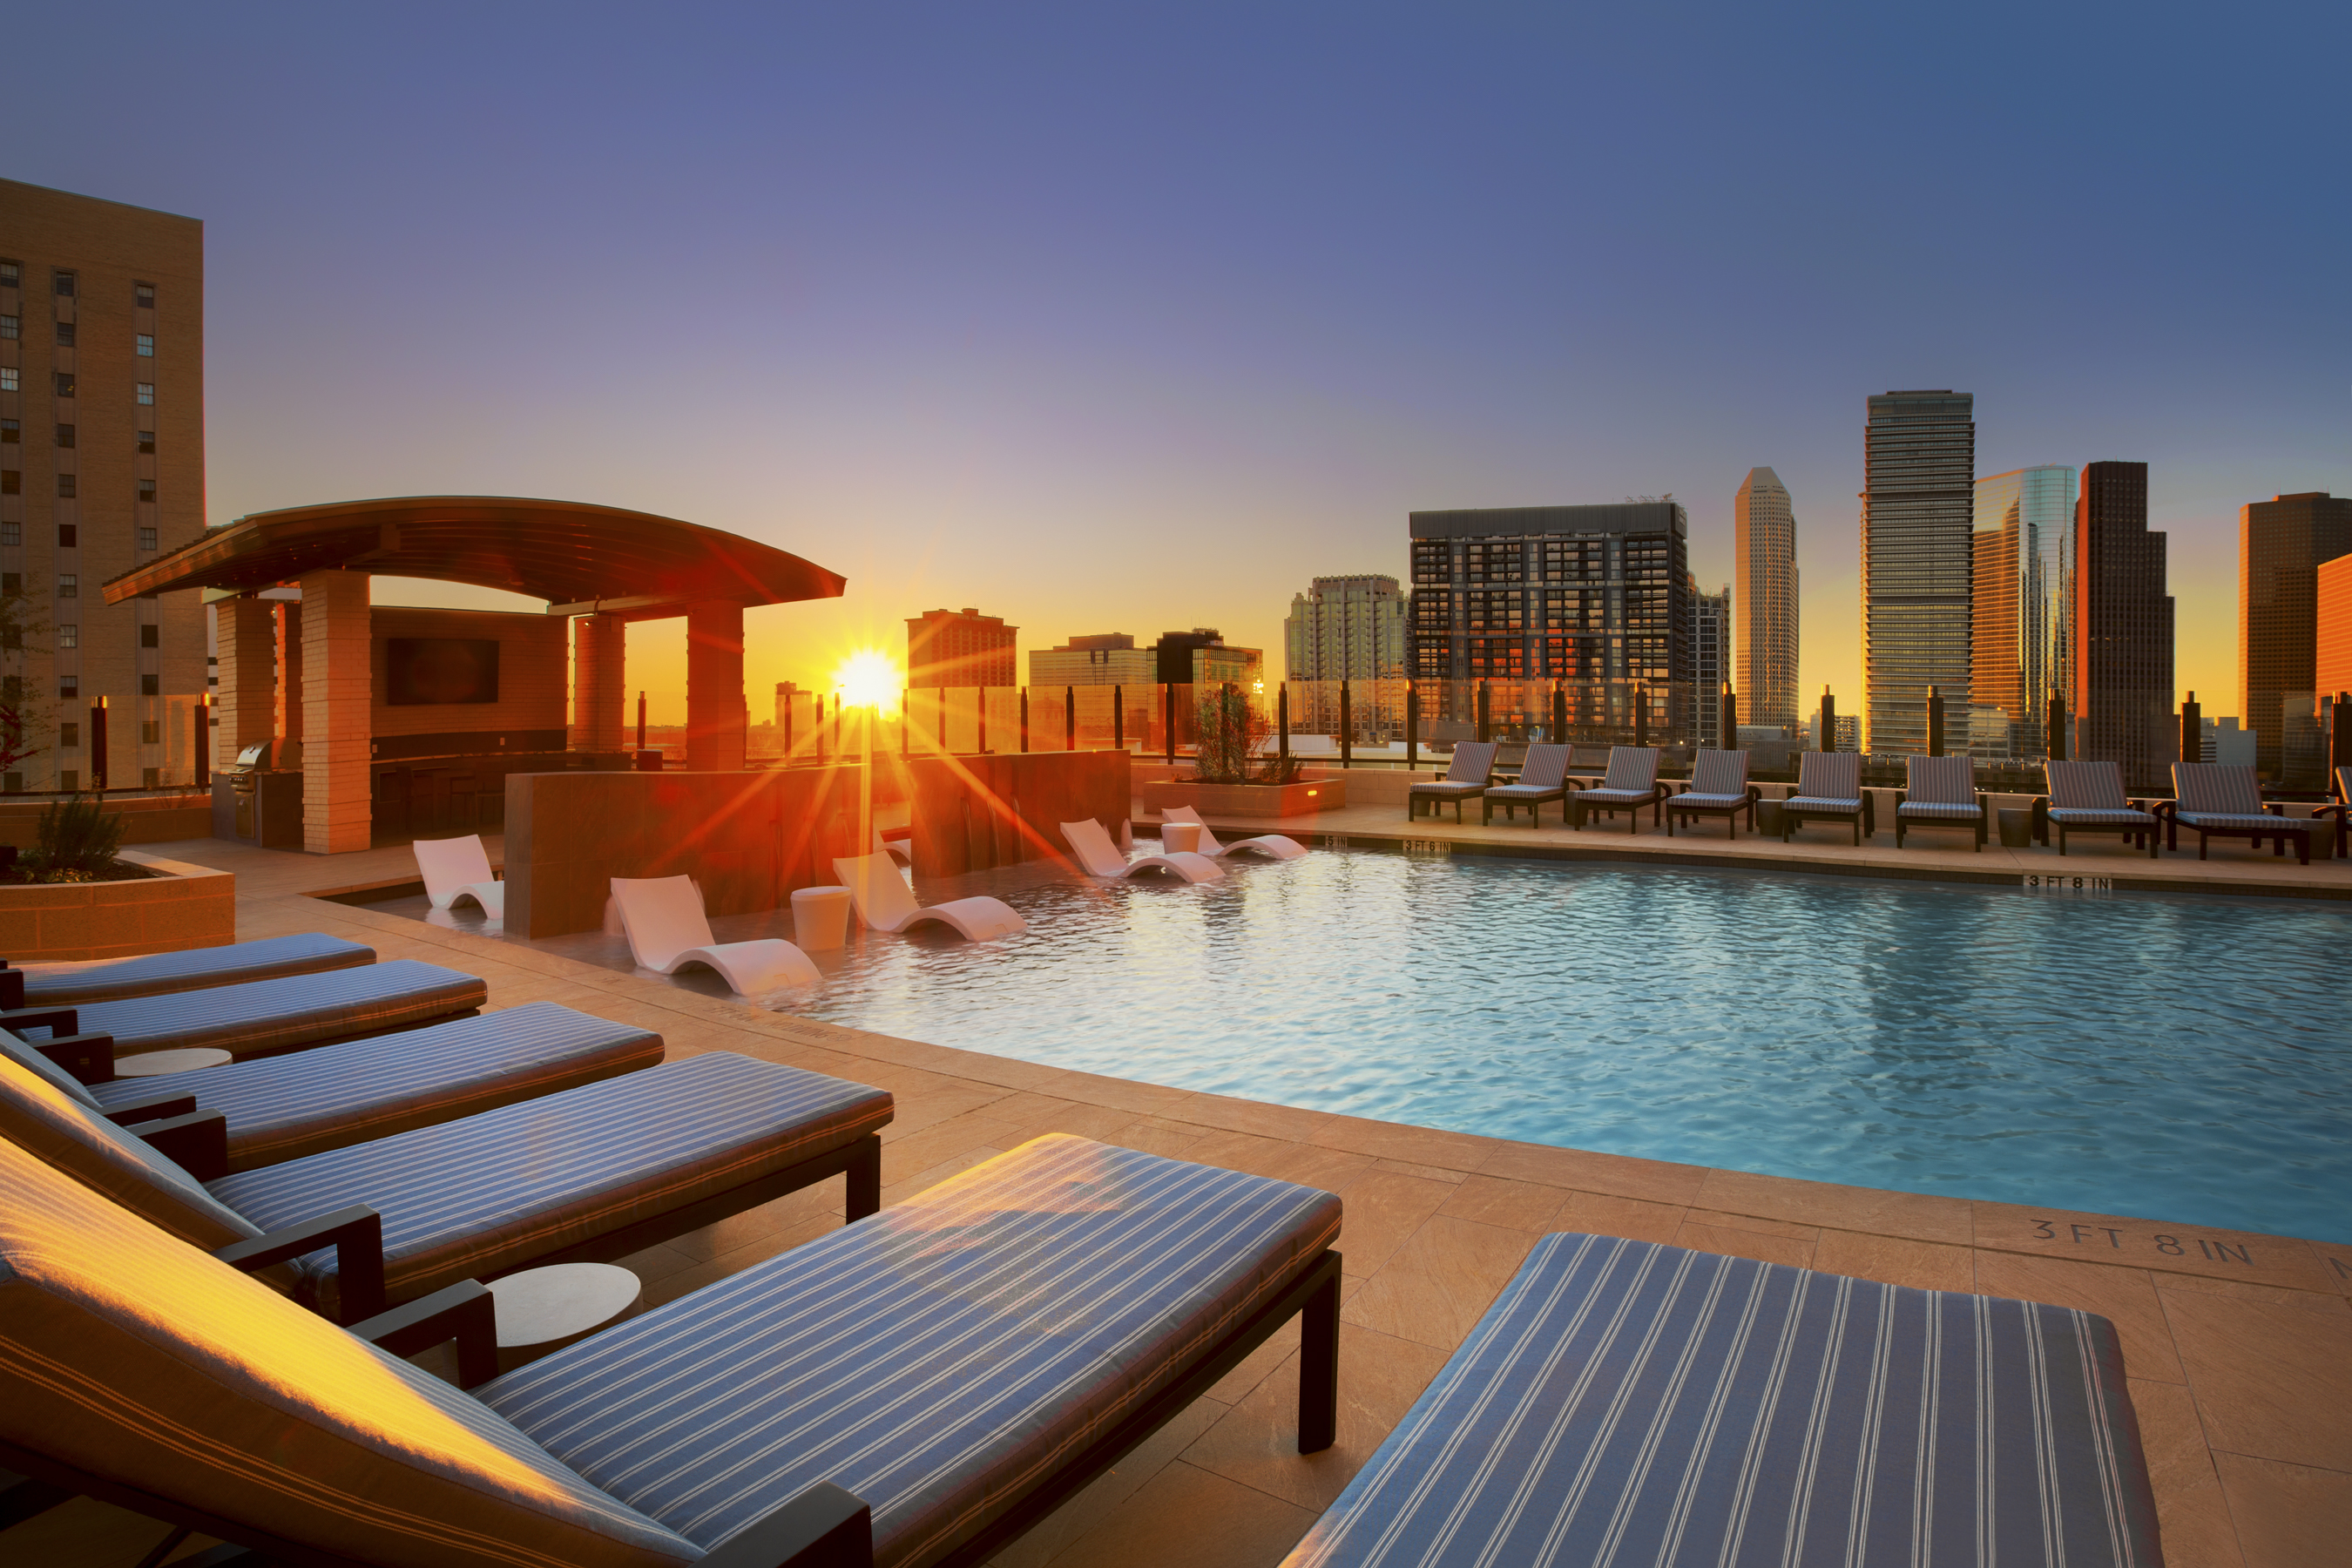 30104562-web_res_downtown_pool_sunset_revised_by_rob-harris.jpg